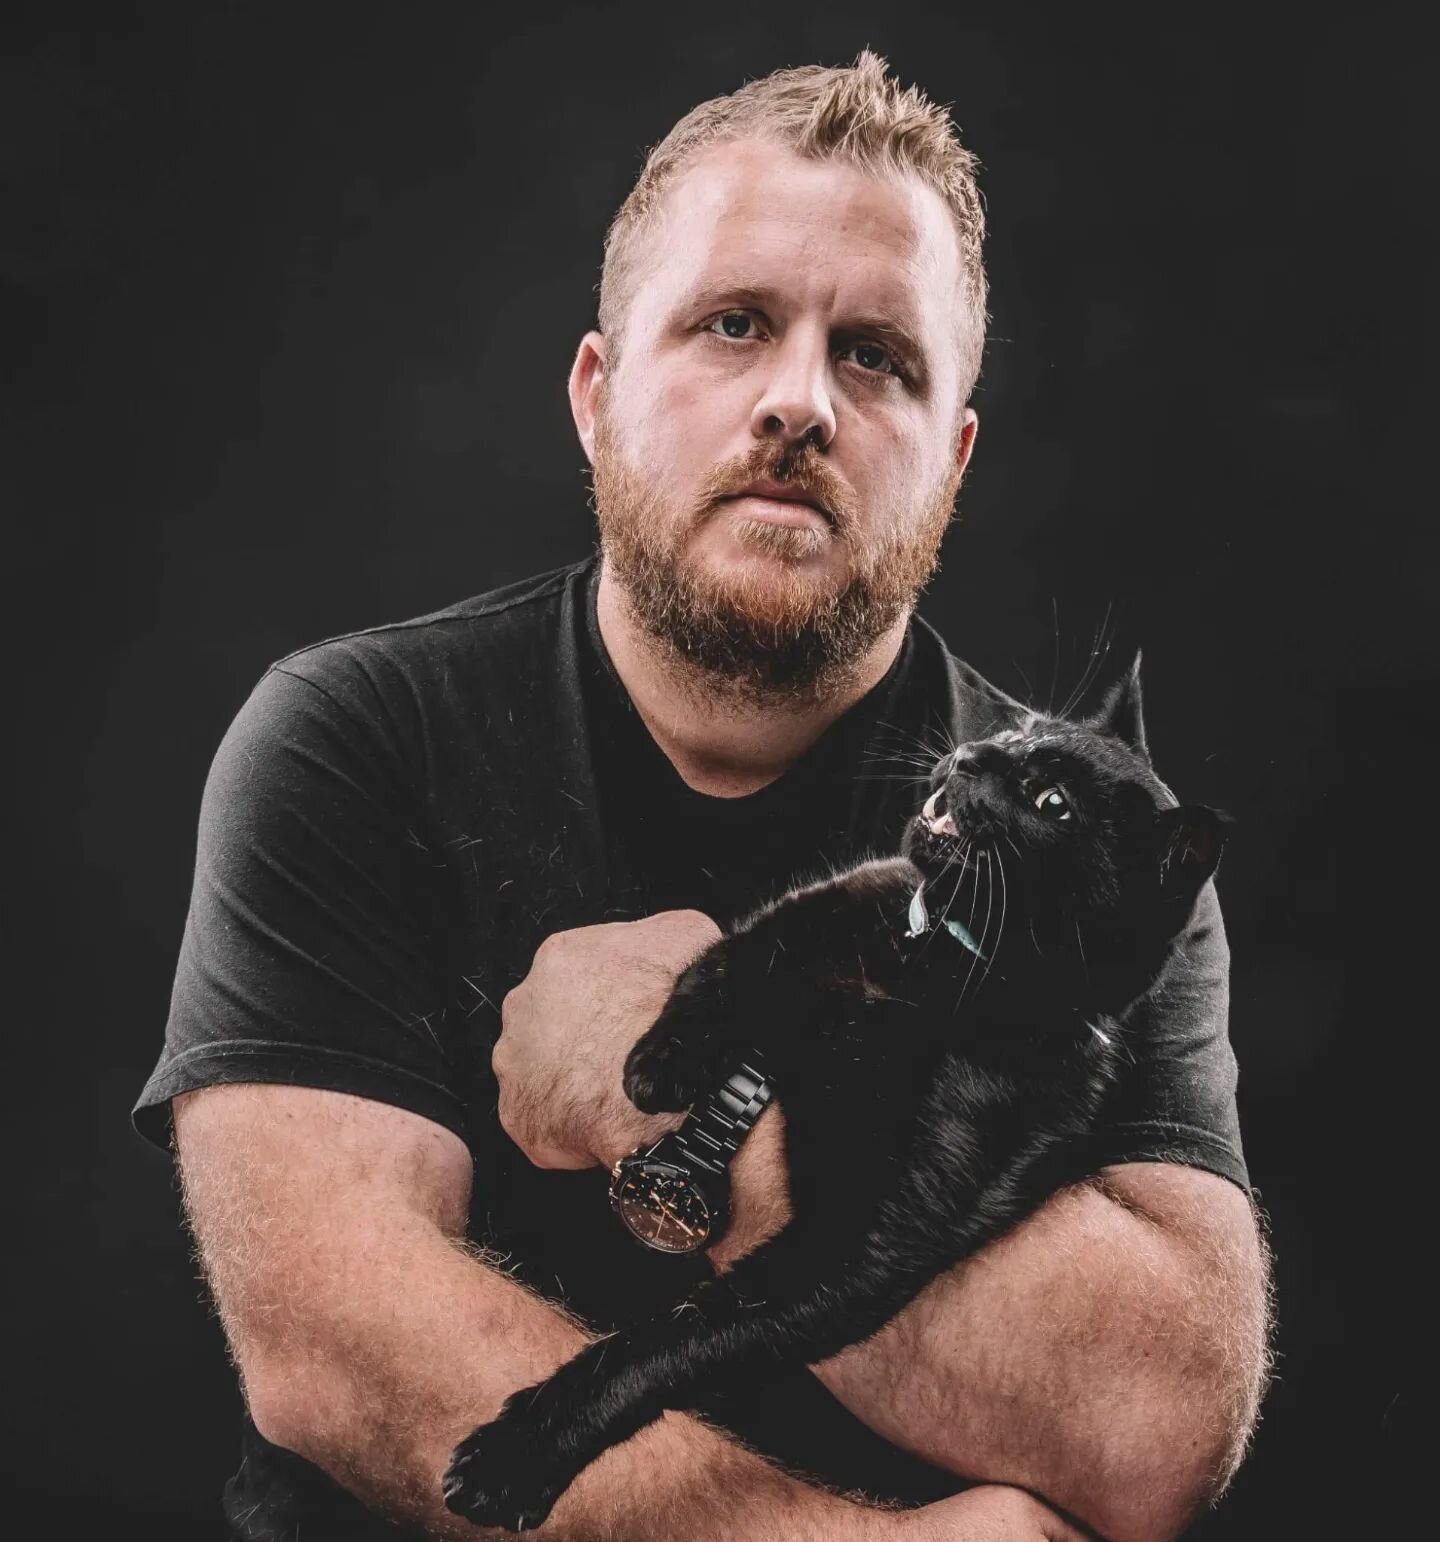 As every cat owner knows, nobody owns a cat. lol

#cat #blackcat #animal #photography #studio #portrait  #snapshotimagery  #macarthur